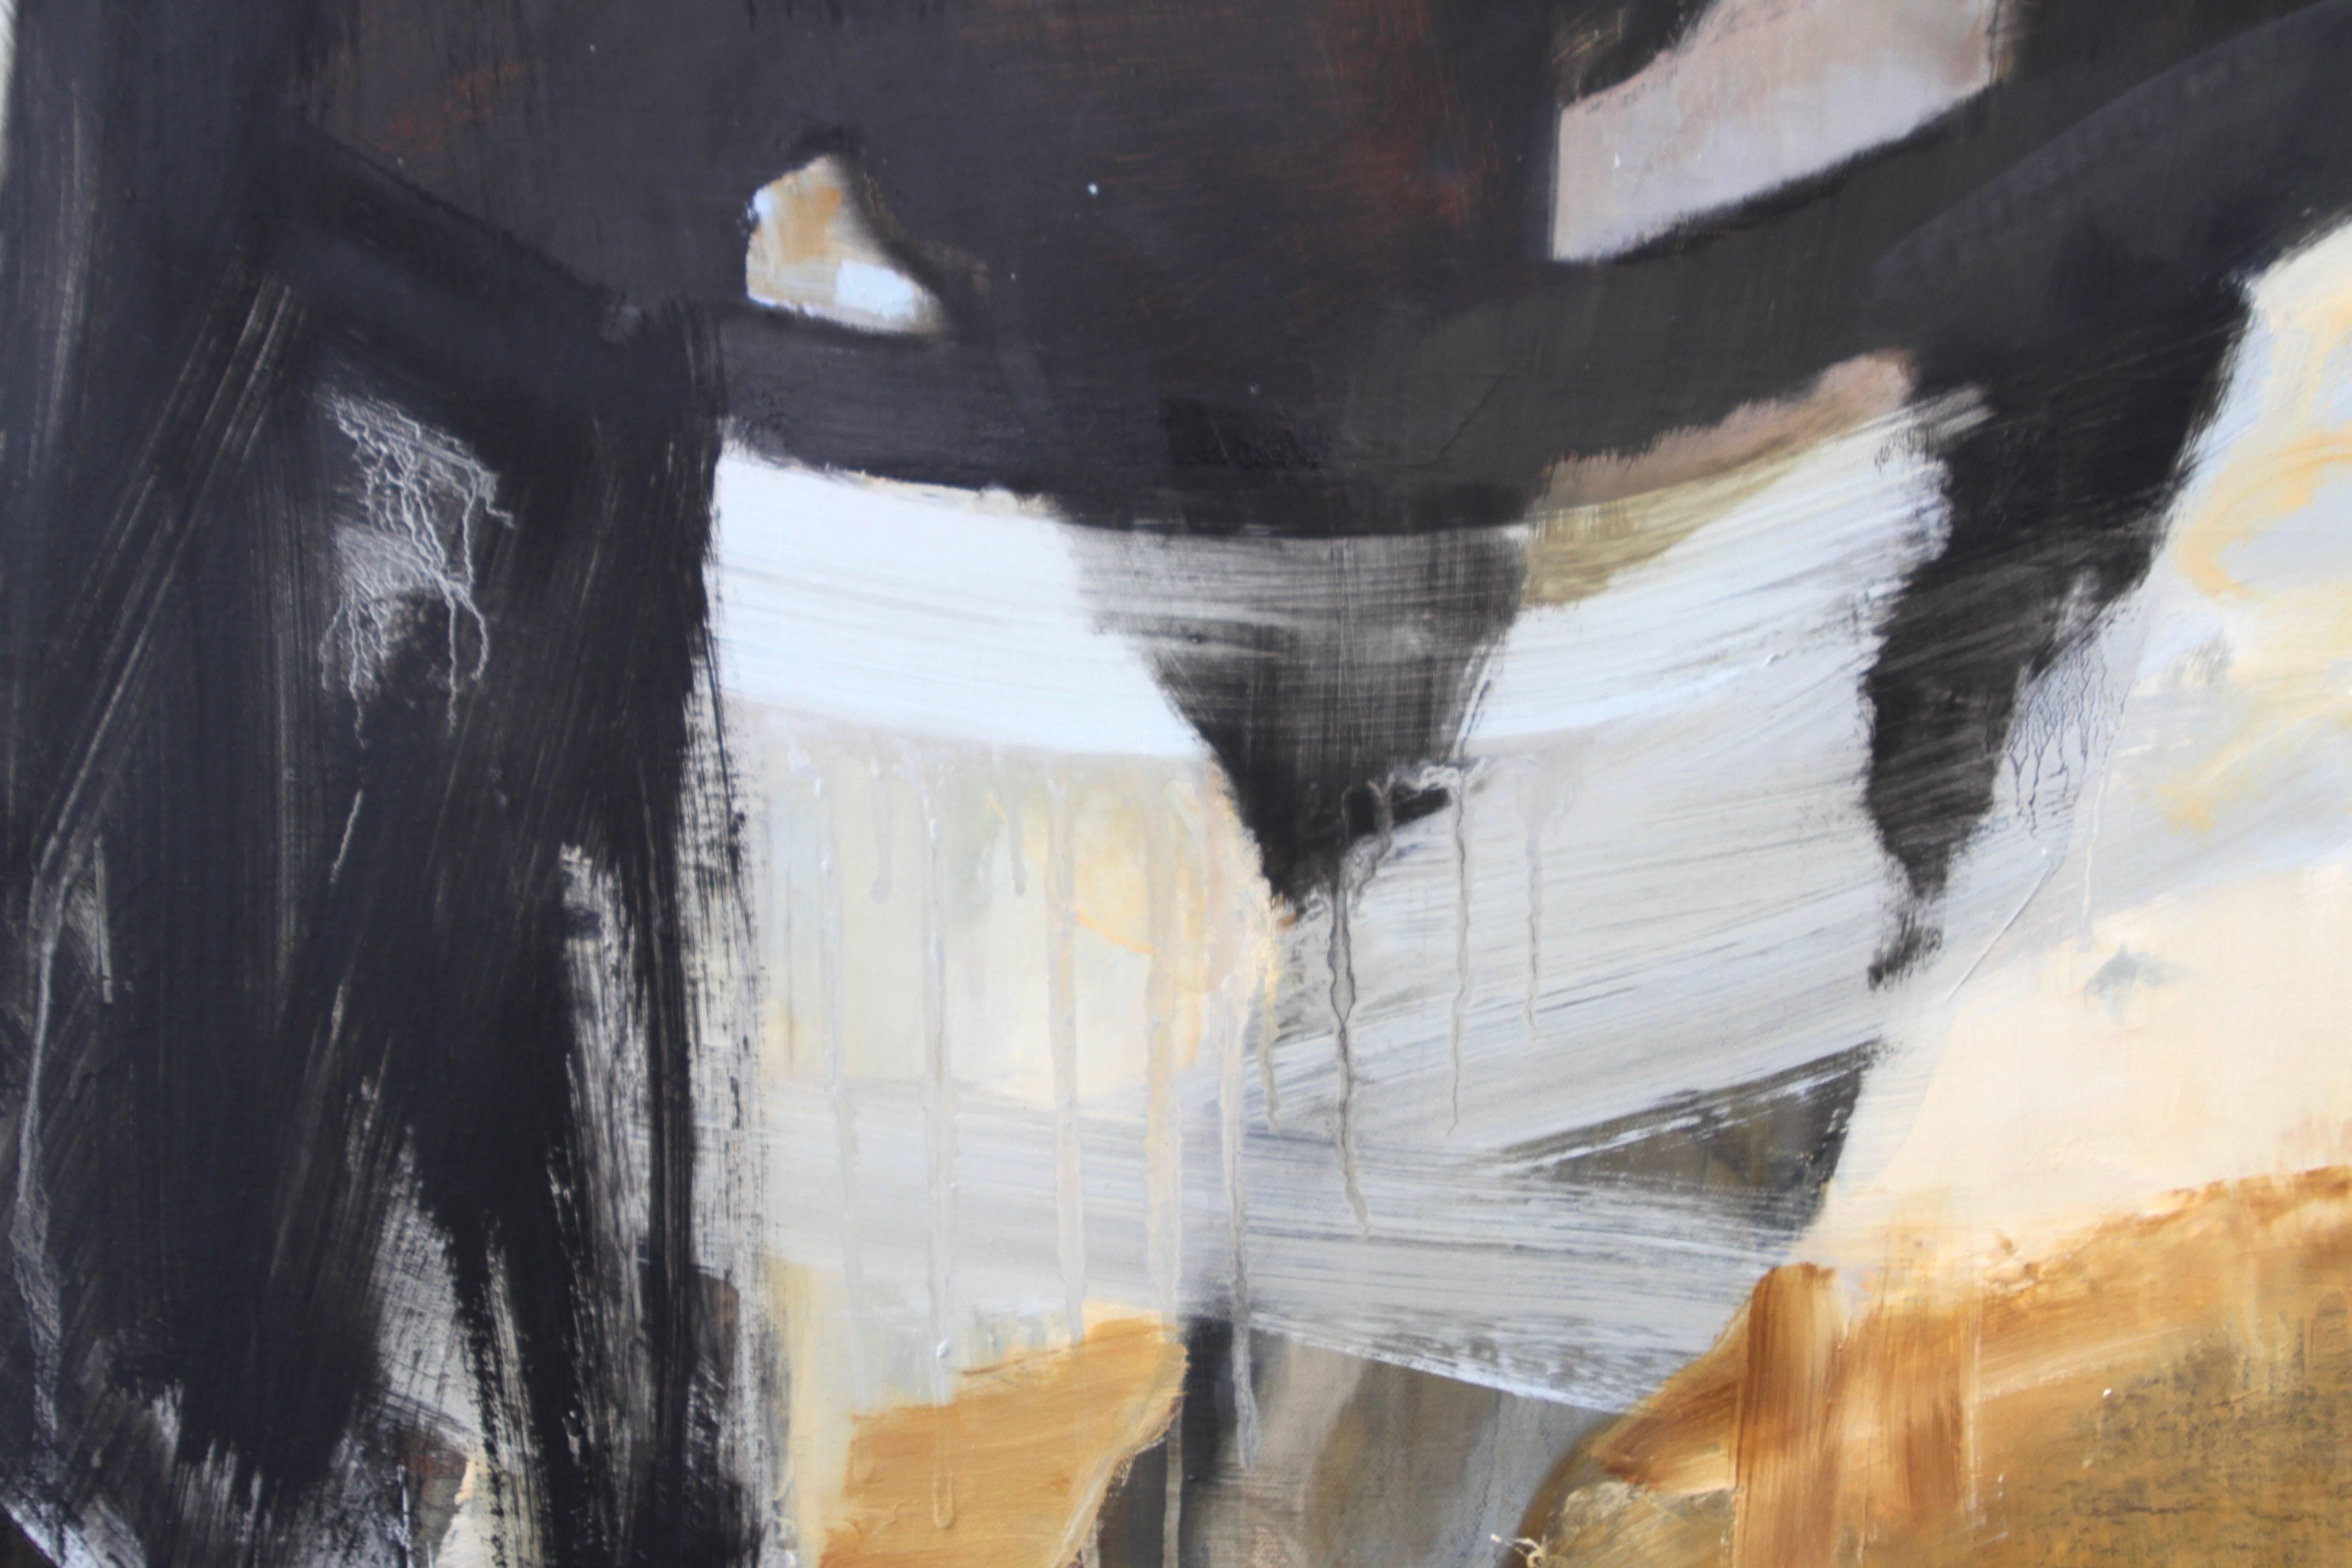 Equestrian painting of a horse in motion by Diana Tremaine, whose large-scale, dynamic, figurative oil paintings reflect a search for truth and meaning in the human experience. She develops brushstrokes and marks by adding and then obliterating some